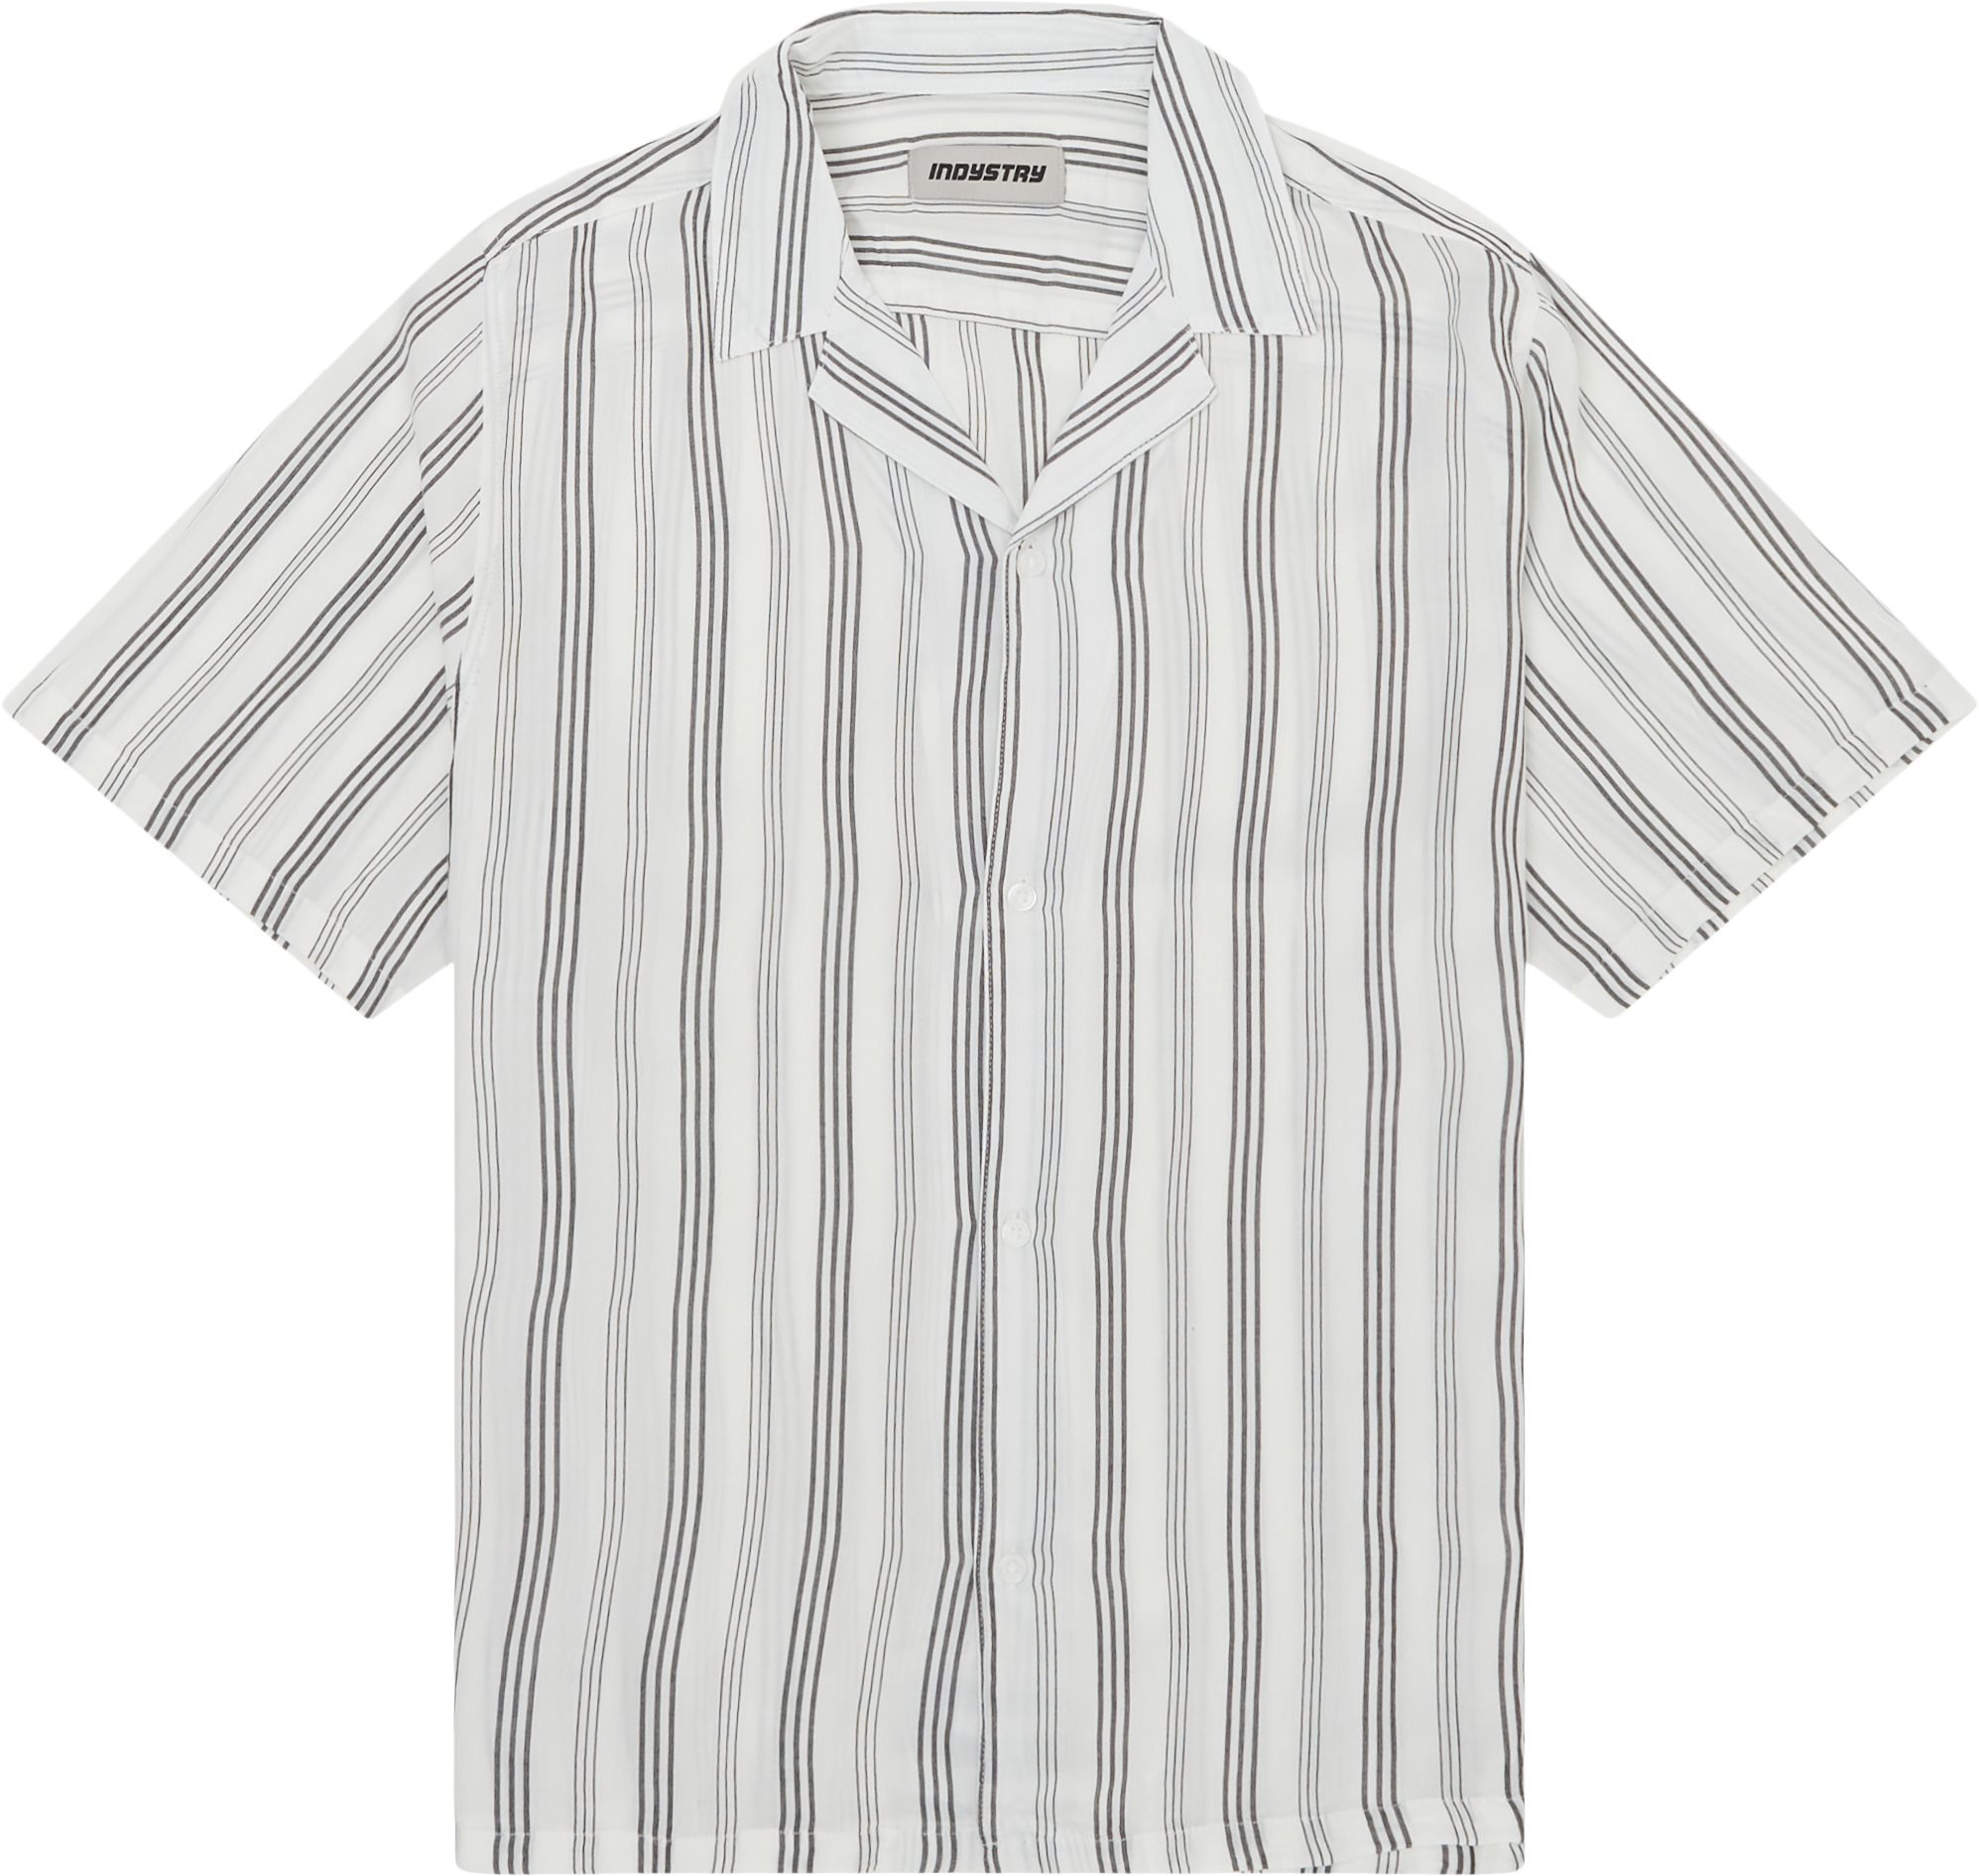 INDYSTRY Shirts VENICE White